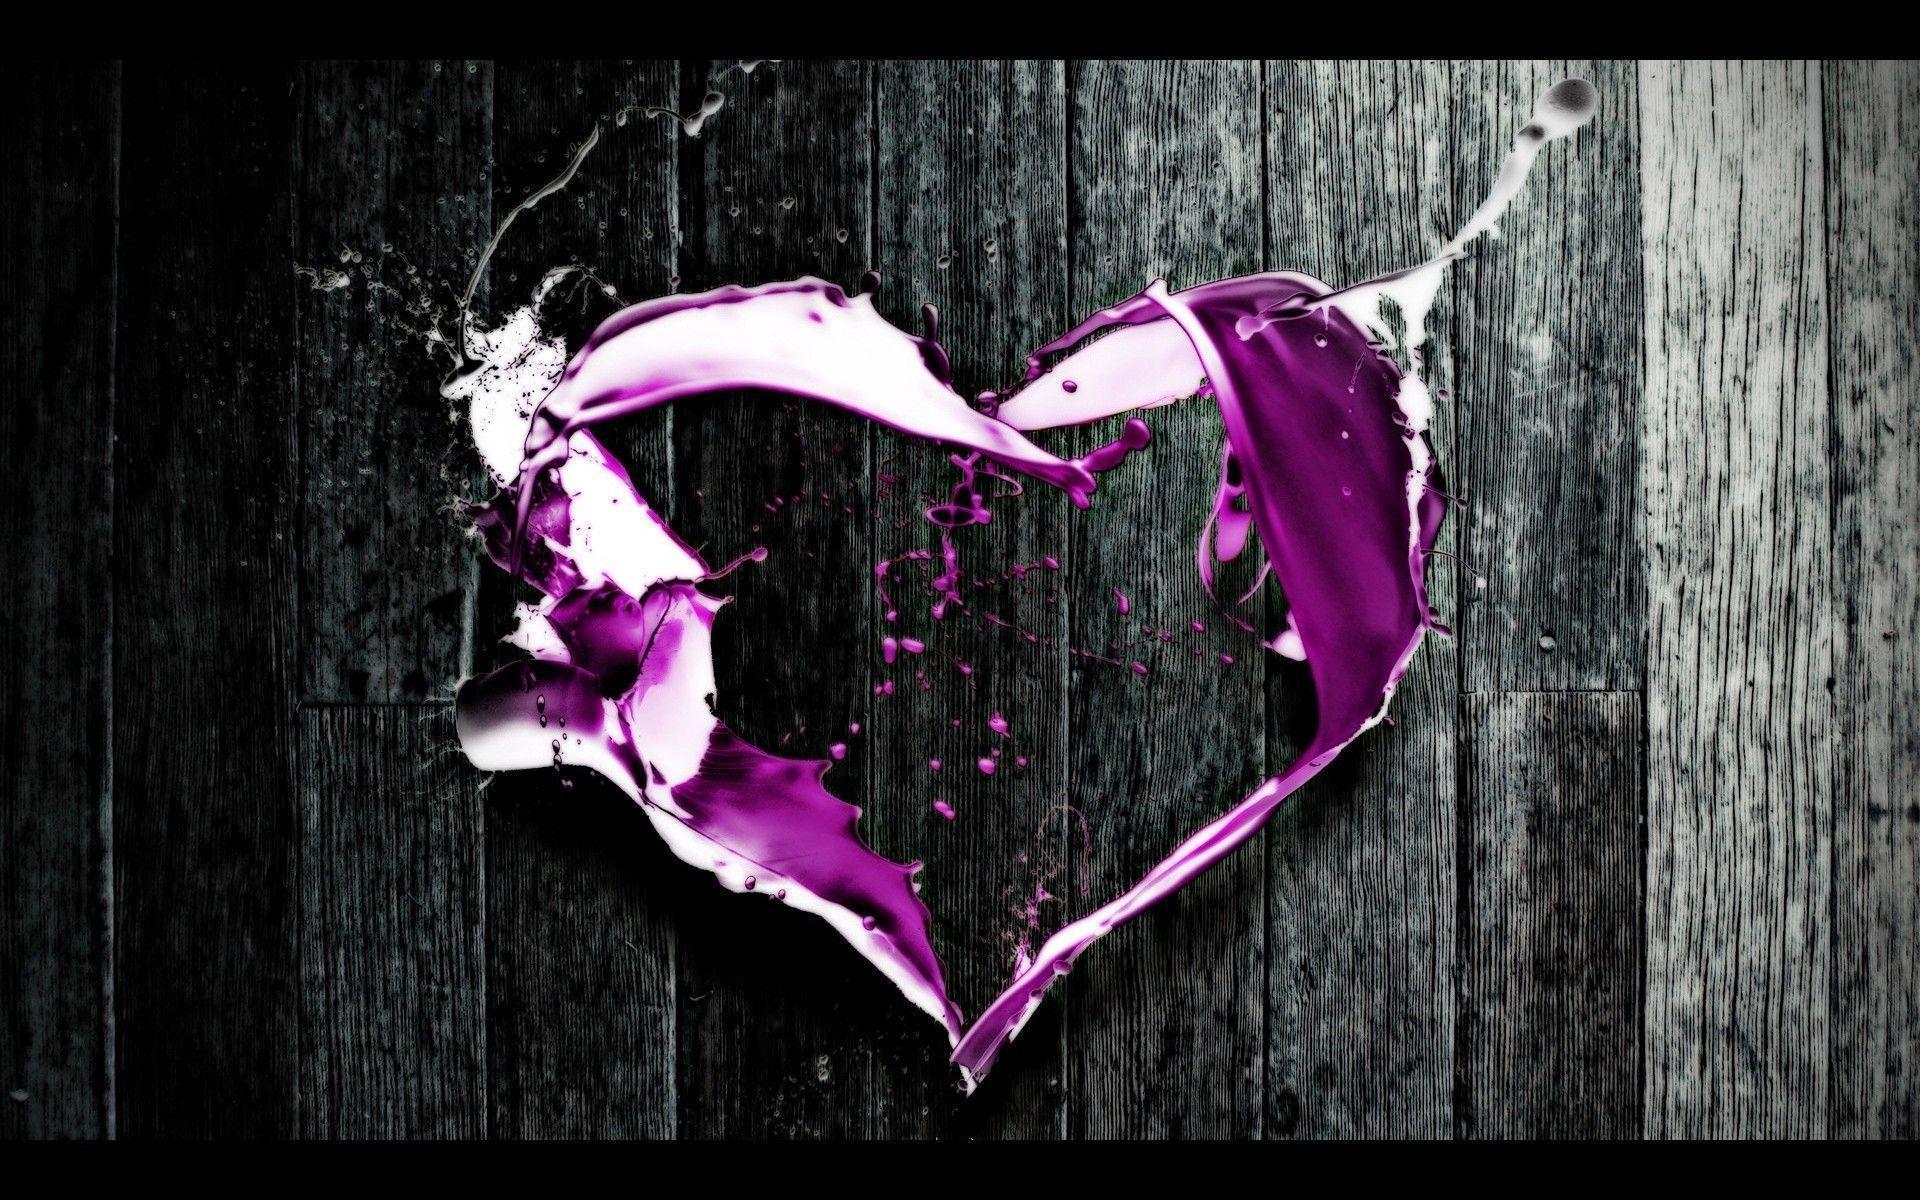 Purple Love Heart on Wooden Surface Free and Wallpaper